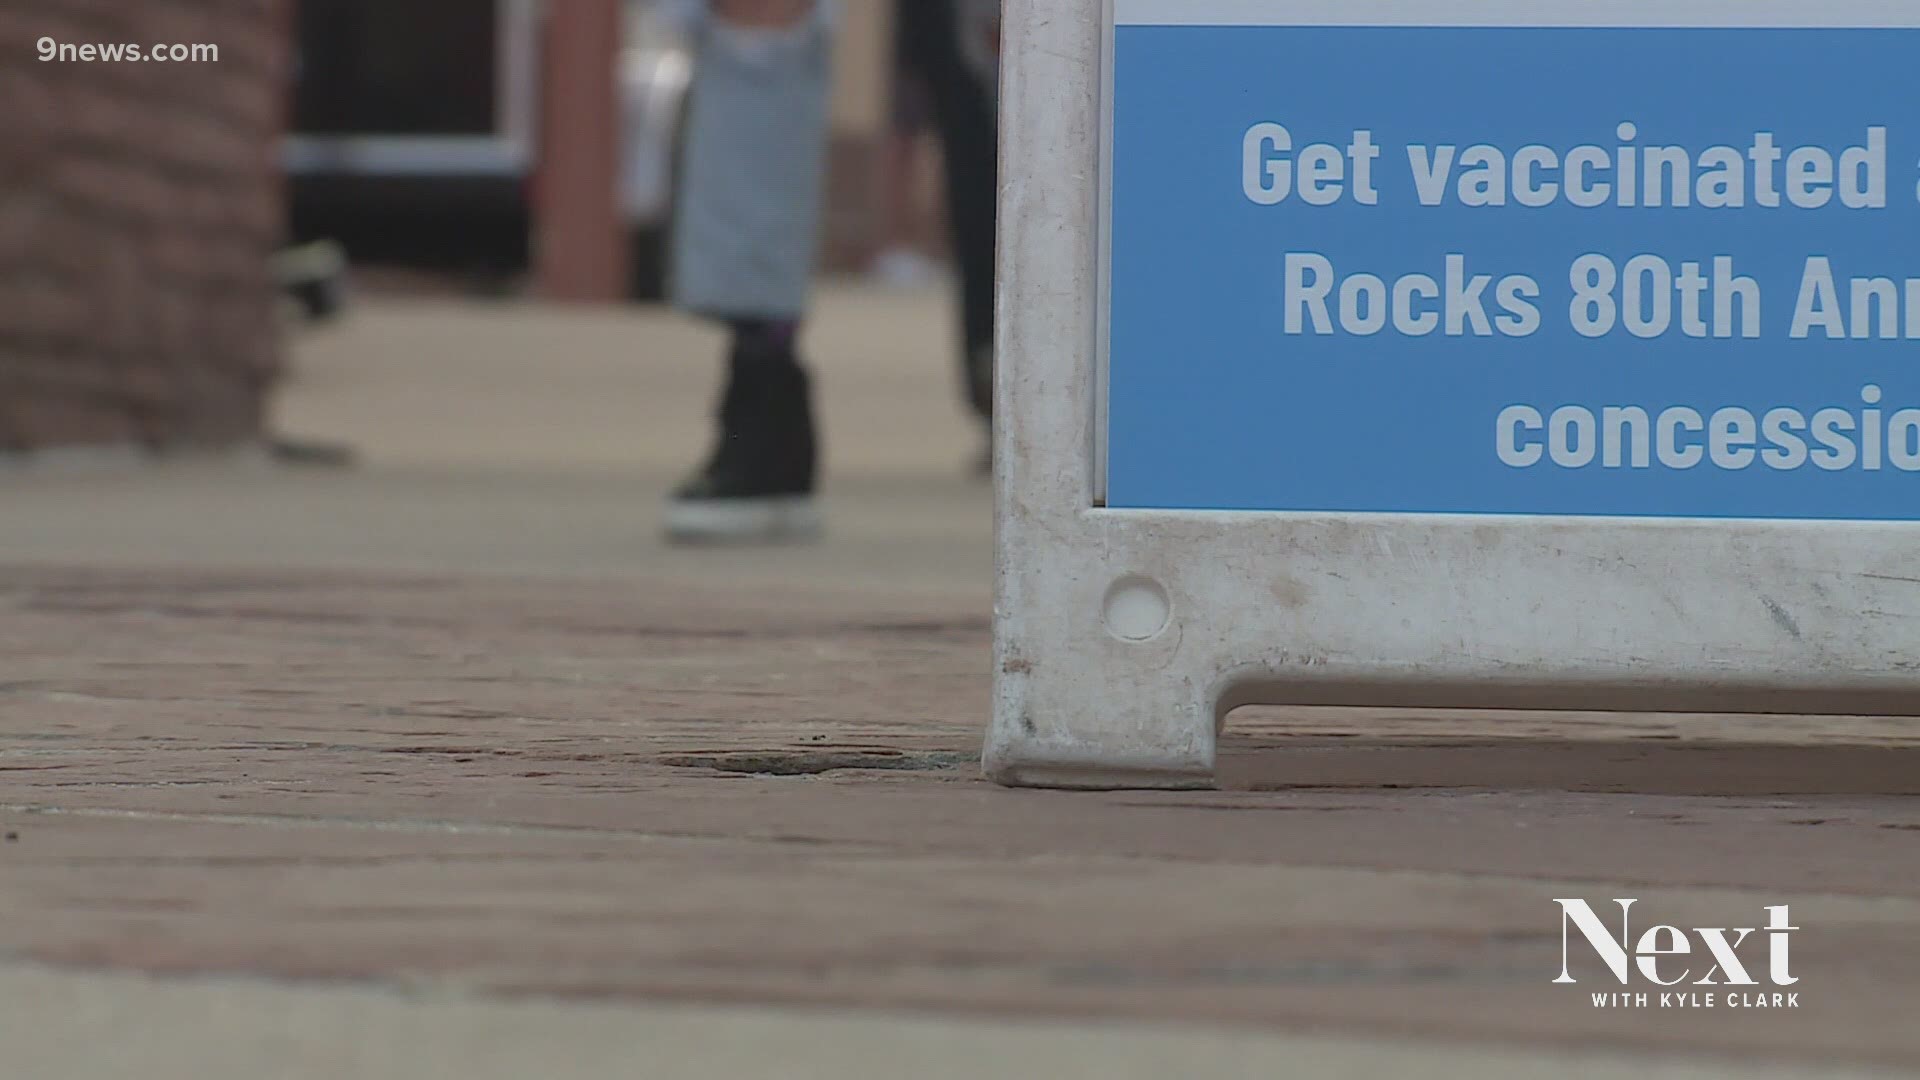 With more supply, Colorado decided to reach people who are hesitant or who haven't had time by offering the COVID vaccine at Coors Field, Red Rocks and ski lines.